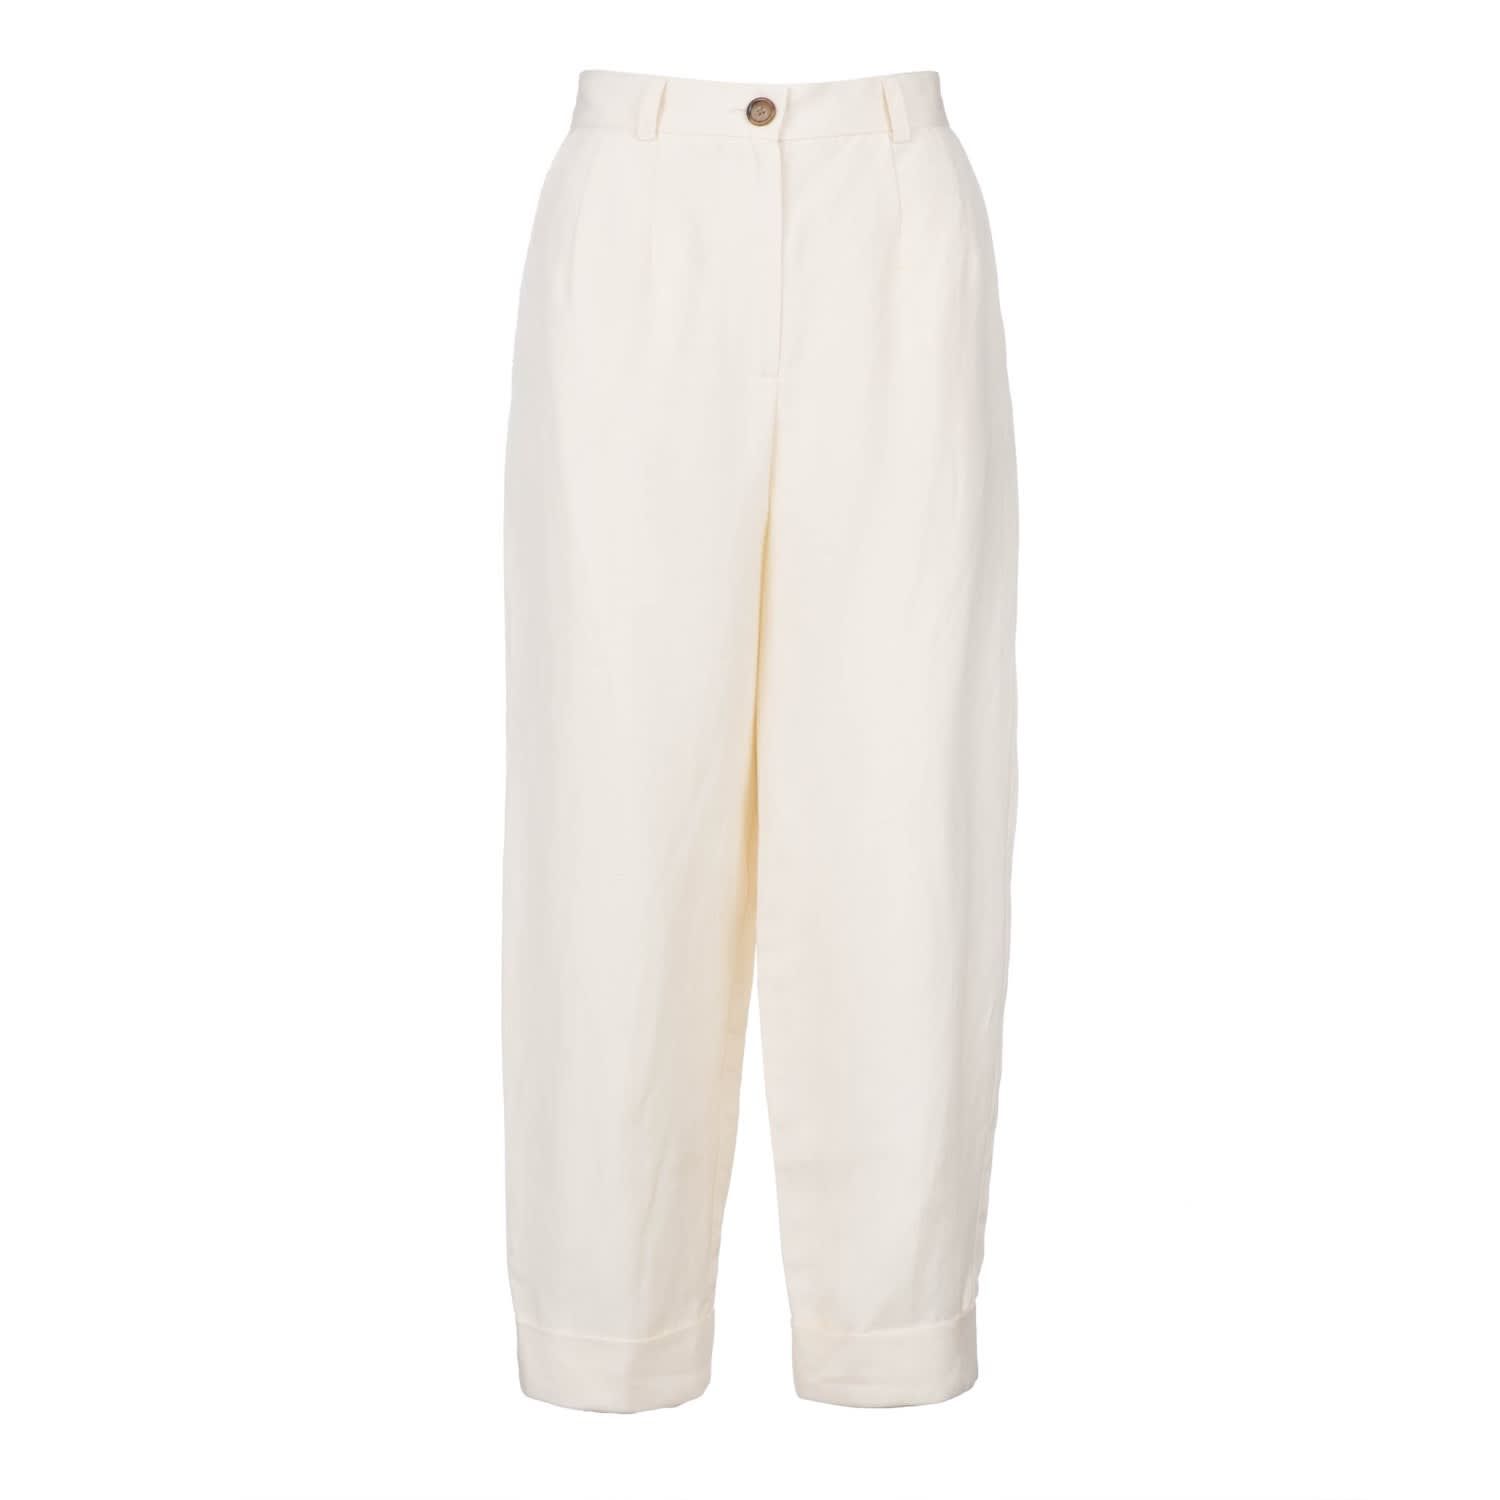 Paperboy Pants | Wolf and Badger (Global excl. US)